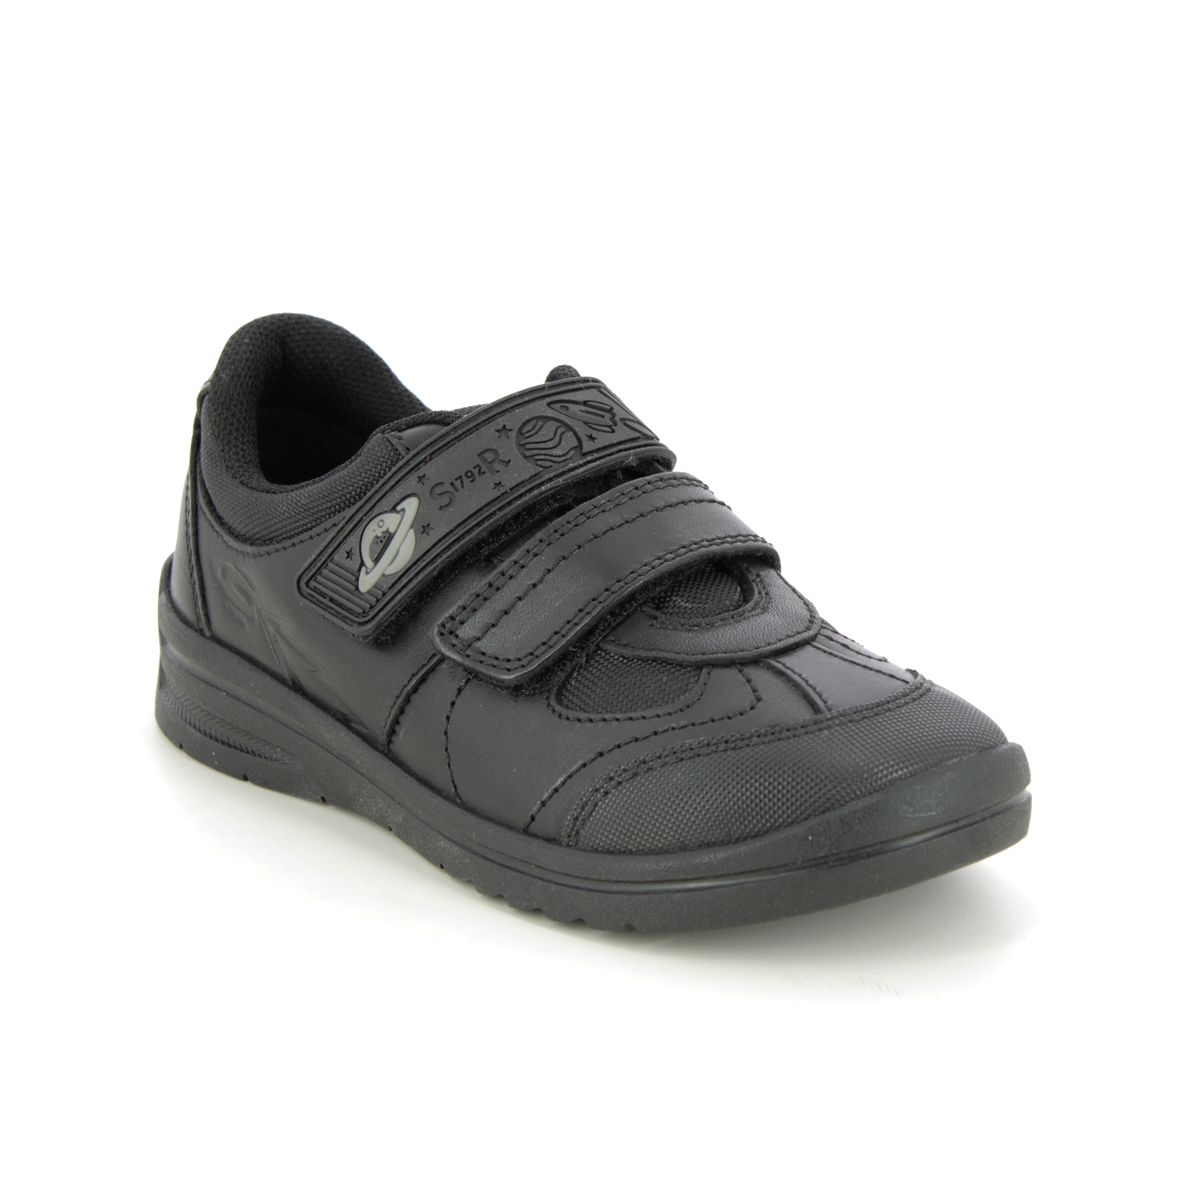 Start Rite - Rocket 2V In Black Leather 2797-75E In Size 2.5 In Plain Black Leather For School Boys Shoes  In Black Leather For kids